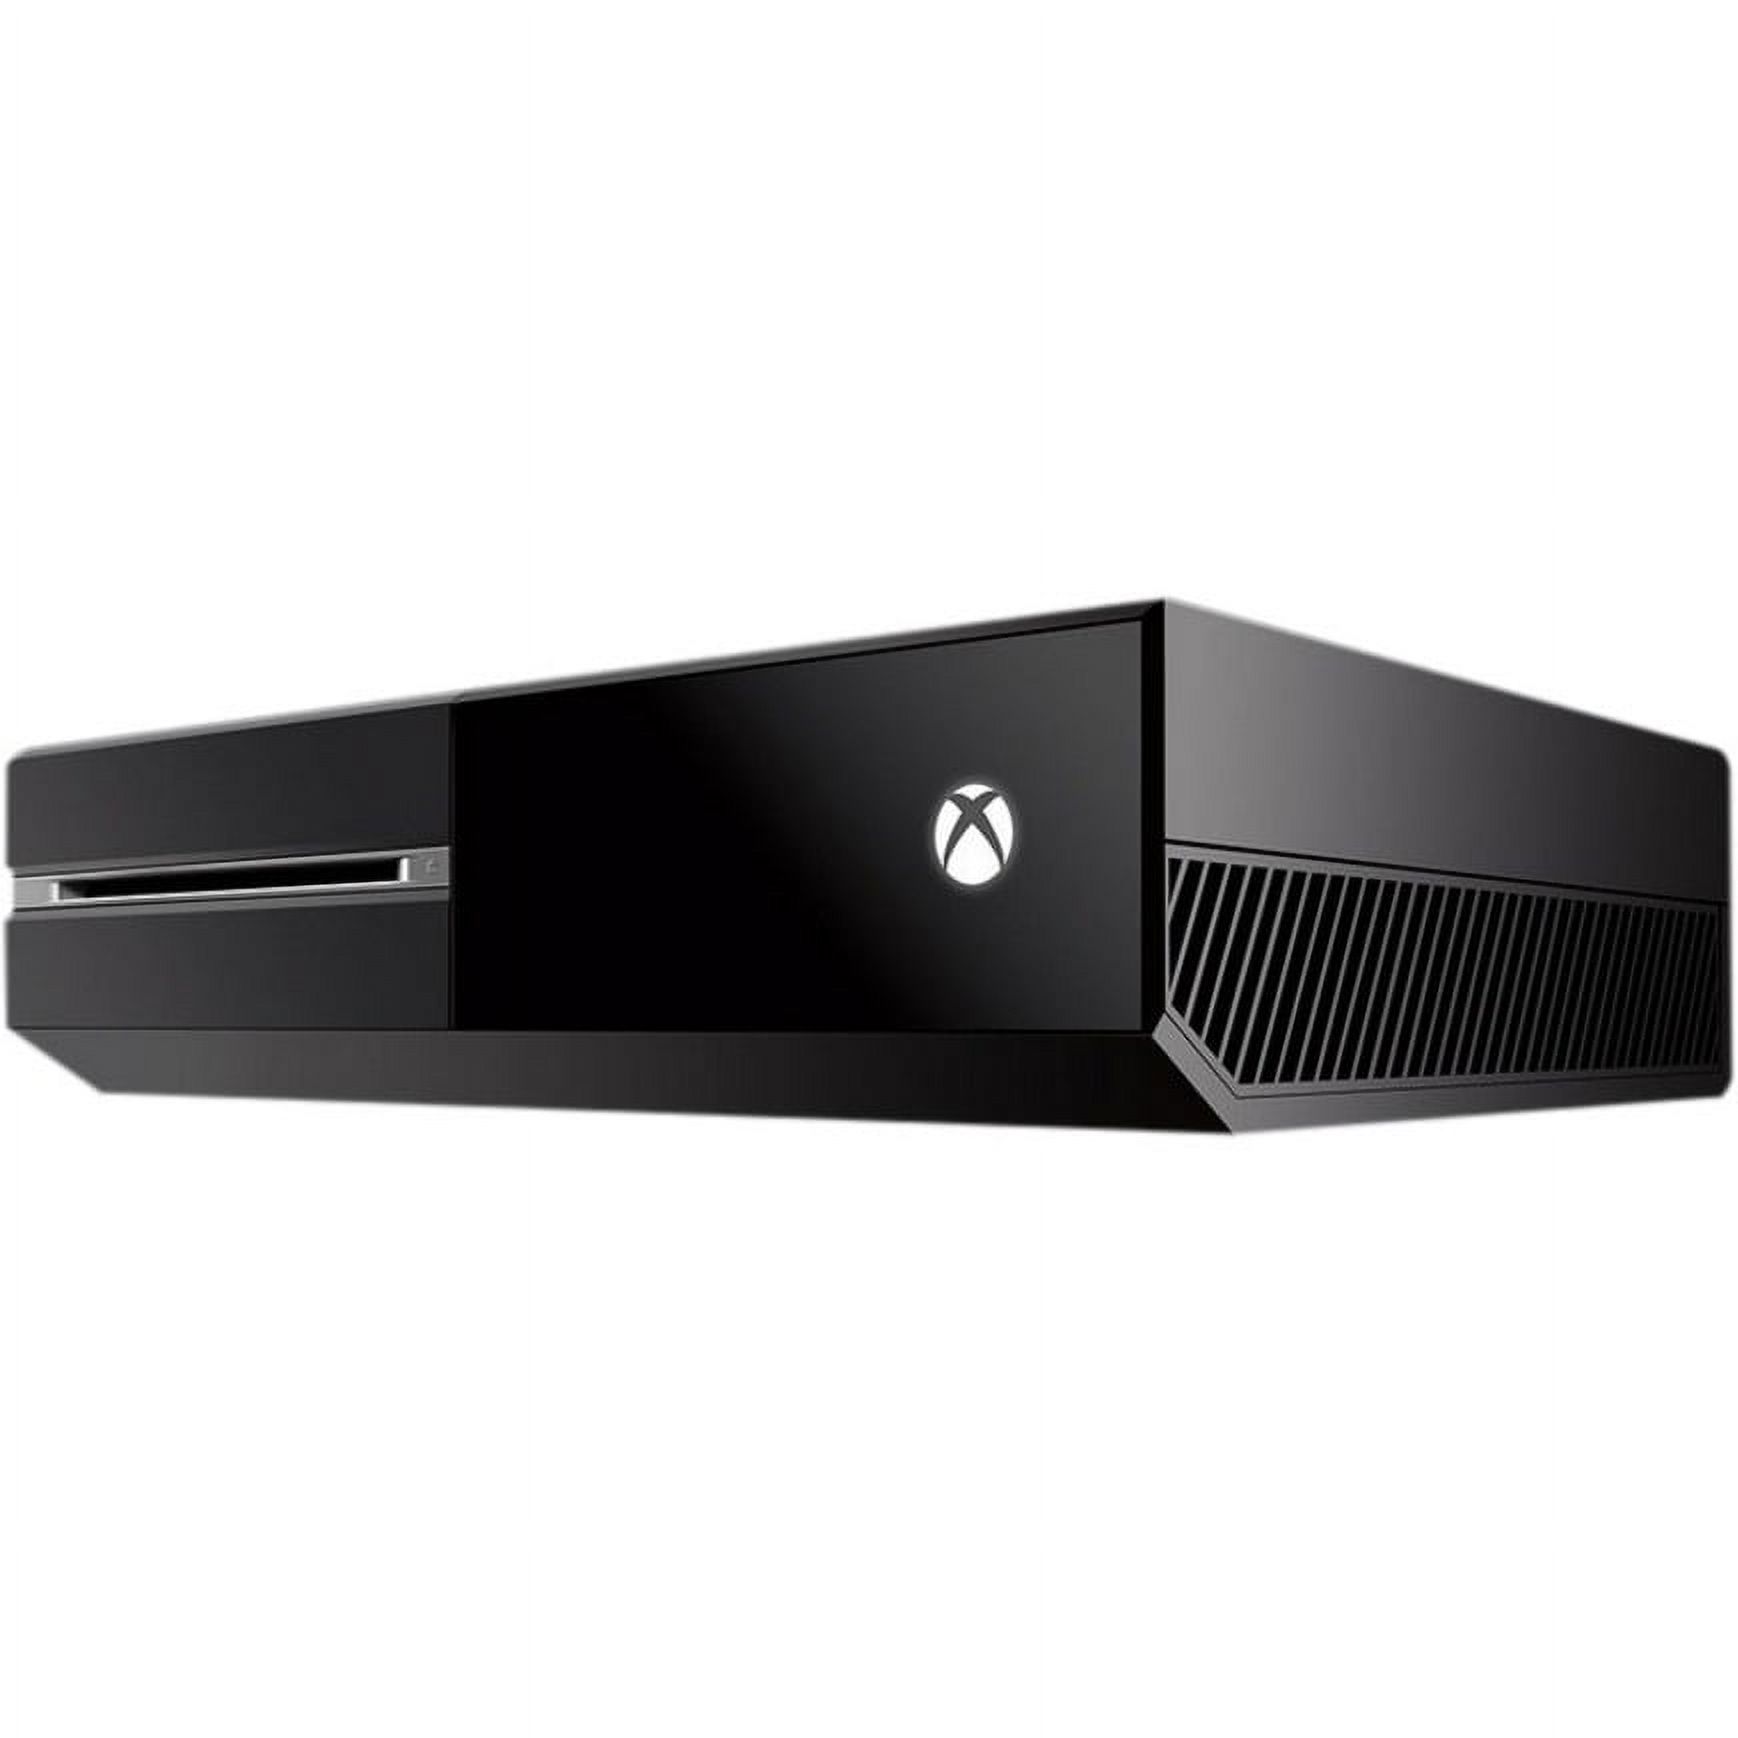 Microsoft Xbox One Gaming Console - image 2 of 4